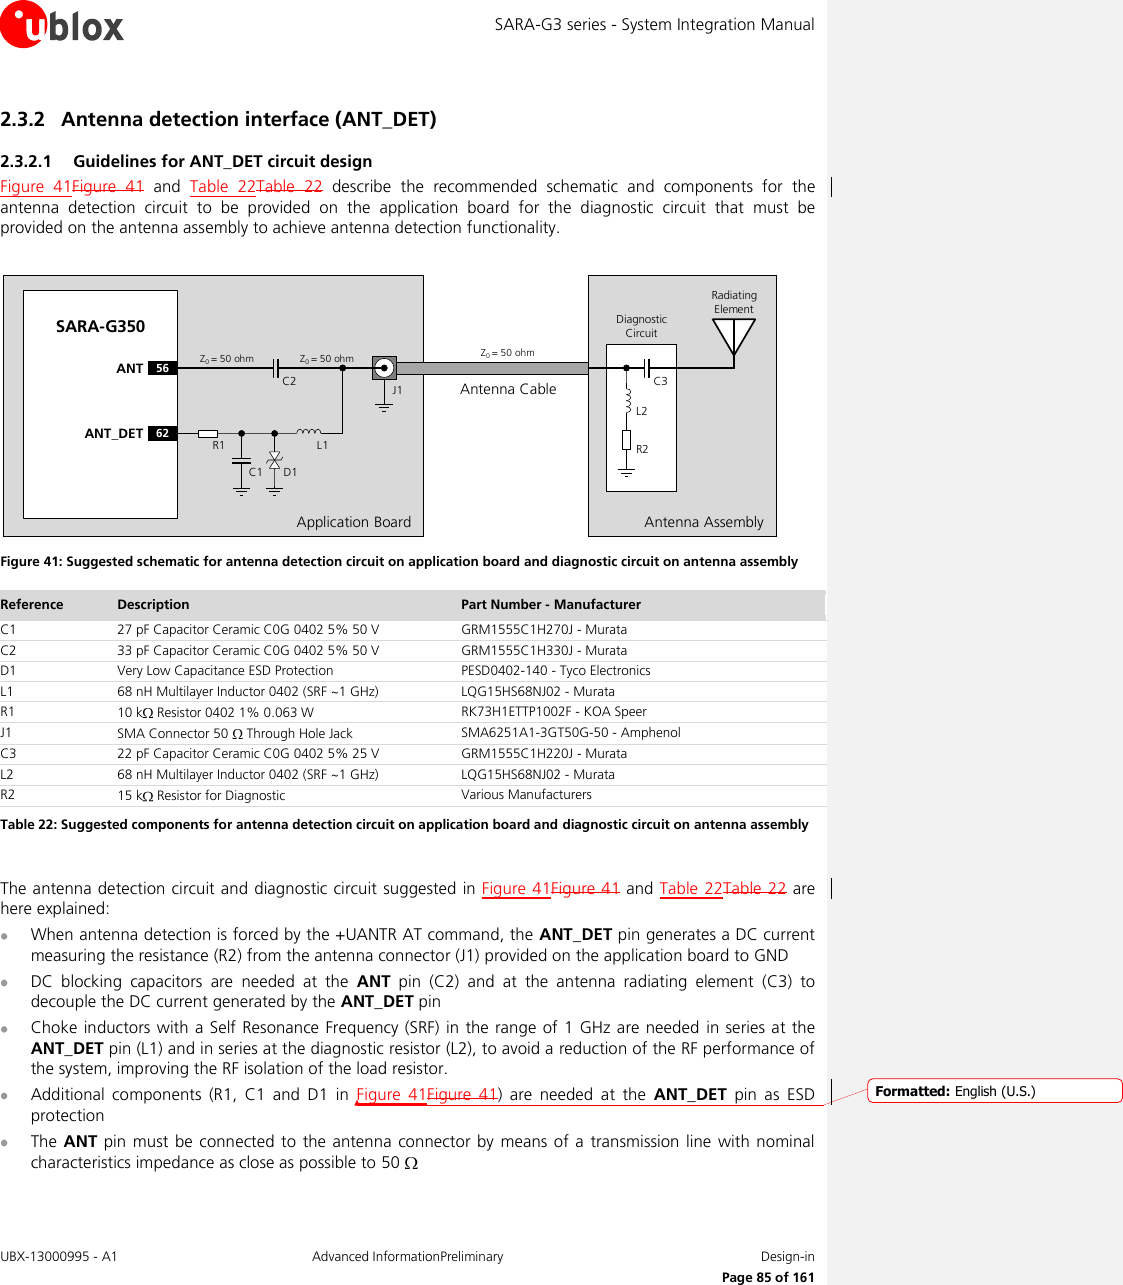 SARA-G3 series - System Integration Manual UBX-13000995 - A1  Advanced InformationPreliminary  Design-in     Page 85 of 161 2.3.2 Antenna detection interface (ANT_DET) 2.3.2.1 Guidelines for ANT_DET circuit design Figure  41Figure  41  and  Table  22Table  22  describe  the  recommended  schematic  and  components  for  the antenna  detection  circuit  to  be  provided  on  the  application  board  for  the  diagnostic  circuit  that  must  be provided on the antenna assembly to achieve antenna detection functionality.  Application BoardAntenna CableSARA-G35056ANT62ANT_DET R1C1 D1L1C2 J1Z0= 50 ohm Z0= 50 ohm Z0= 50 ohmAntenna AssemblyR2C3L2Radiating ElementDiagnostic Circuit Figure 41: Suggested schematic for antenna detection circuit on application board and diagnostic circuit on antenna assembly Reference Description Part Number - Manufacturer C1 27 pF Capacitor Ceramic C0G 0402 5% 50 V GRM1555C1H270J - Murata C2 33 pF Capacitor Ceramic C0G 0402 5% 50 V GRM1555C1H330J - Murata D1 Very Low Capacitance ESD Protection PESD0402-140 - Tyco Electronics L1 68 nH Multilayer Inductor 0402 (SRF ~1 GHz) LQG15HS68NJ02 - Murata R1 10 k  Resistor 0402 1% 0.063 W RK73H1ETTP1002F - KOA Speer J1 SMA Connector 50   Through Hole Jack SMA6251A1-3GT50G-50 - Amphenol C3 22 pF Capacitor Ceramic C0G 0402 5% 25 V  GRM1555C1H220J - Murata L2 68 nH Multilayer Inductor 0402 (SRF ~1 GHz) LQG15HS68NJ02 - Murata R2 15 k  Resistor for Diagnostic Various Manufacturers Table 22: Suggested components for antenna detection circuit on application board and diagnostic circuit on antenna assembly  The antenna detection circuit and diagnostic circuit  suggested in Figure  41Figure 41 and Table 22Table 22 are here explained:  When antenna detection is forced by the +UANTR AT command, the ANT_DET pin generates a DC current measuring the resistance (R2) from the antenna connector (J1) provided on the application board to GND  DC  blocking  capacitors  are  needed  at  the  ANT  pin  (C2)  and  at  the  antenna  radiating  element  (C3)  to decouple the DC current generated by the ANT_DET pin  Choke inductors  with  a Self Resonance Frequency (SRF)  in  the range of 1  GHz are needed  in series at the ANT_DET pin (L1) and in series at the diagnostic resistor (L2), to avoid a reduction of the RF performance of the system, improving the RF isolation of the load resistor.   Additional  components  (R1,  C1  and  D1  in  Figure  41Figure  41)  are  needed  at  the  ANT_DET  pin  as  ESD protection  The ANT pin  must be connected to  the  antenna  connector by means  of a  transmission line with  nominal characteristics impedance as close as possible to 50    Formatted: English (U.S.)